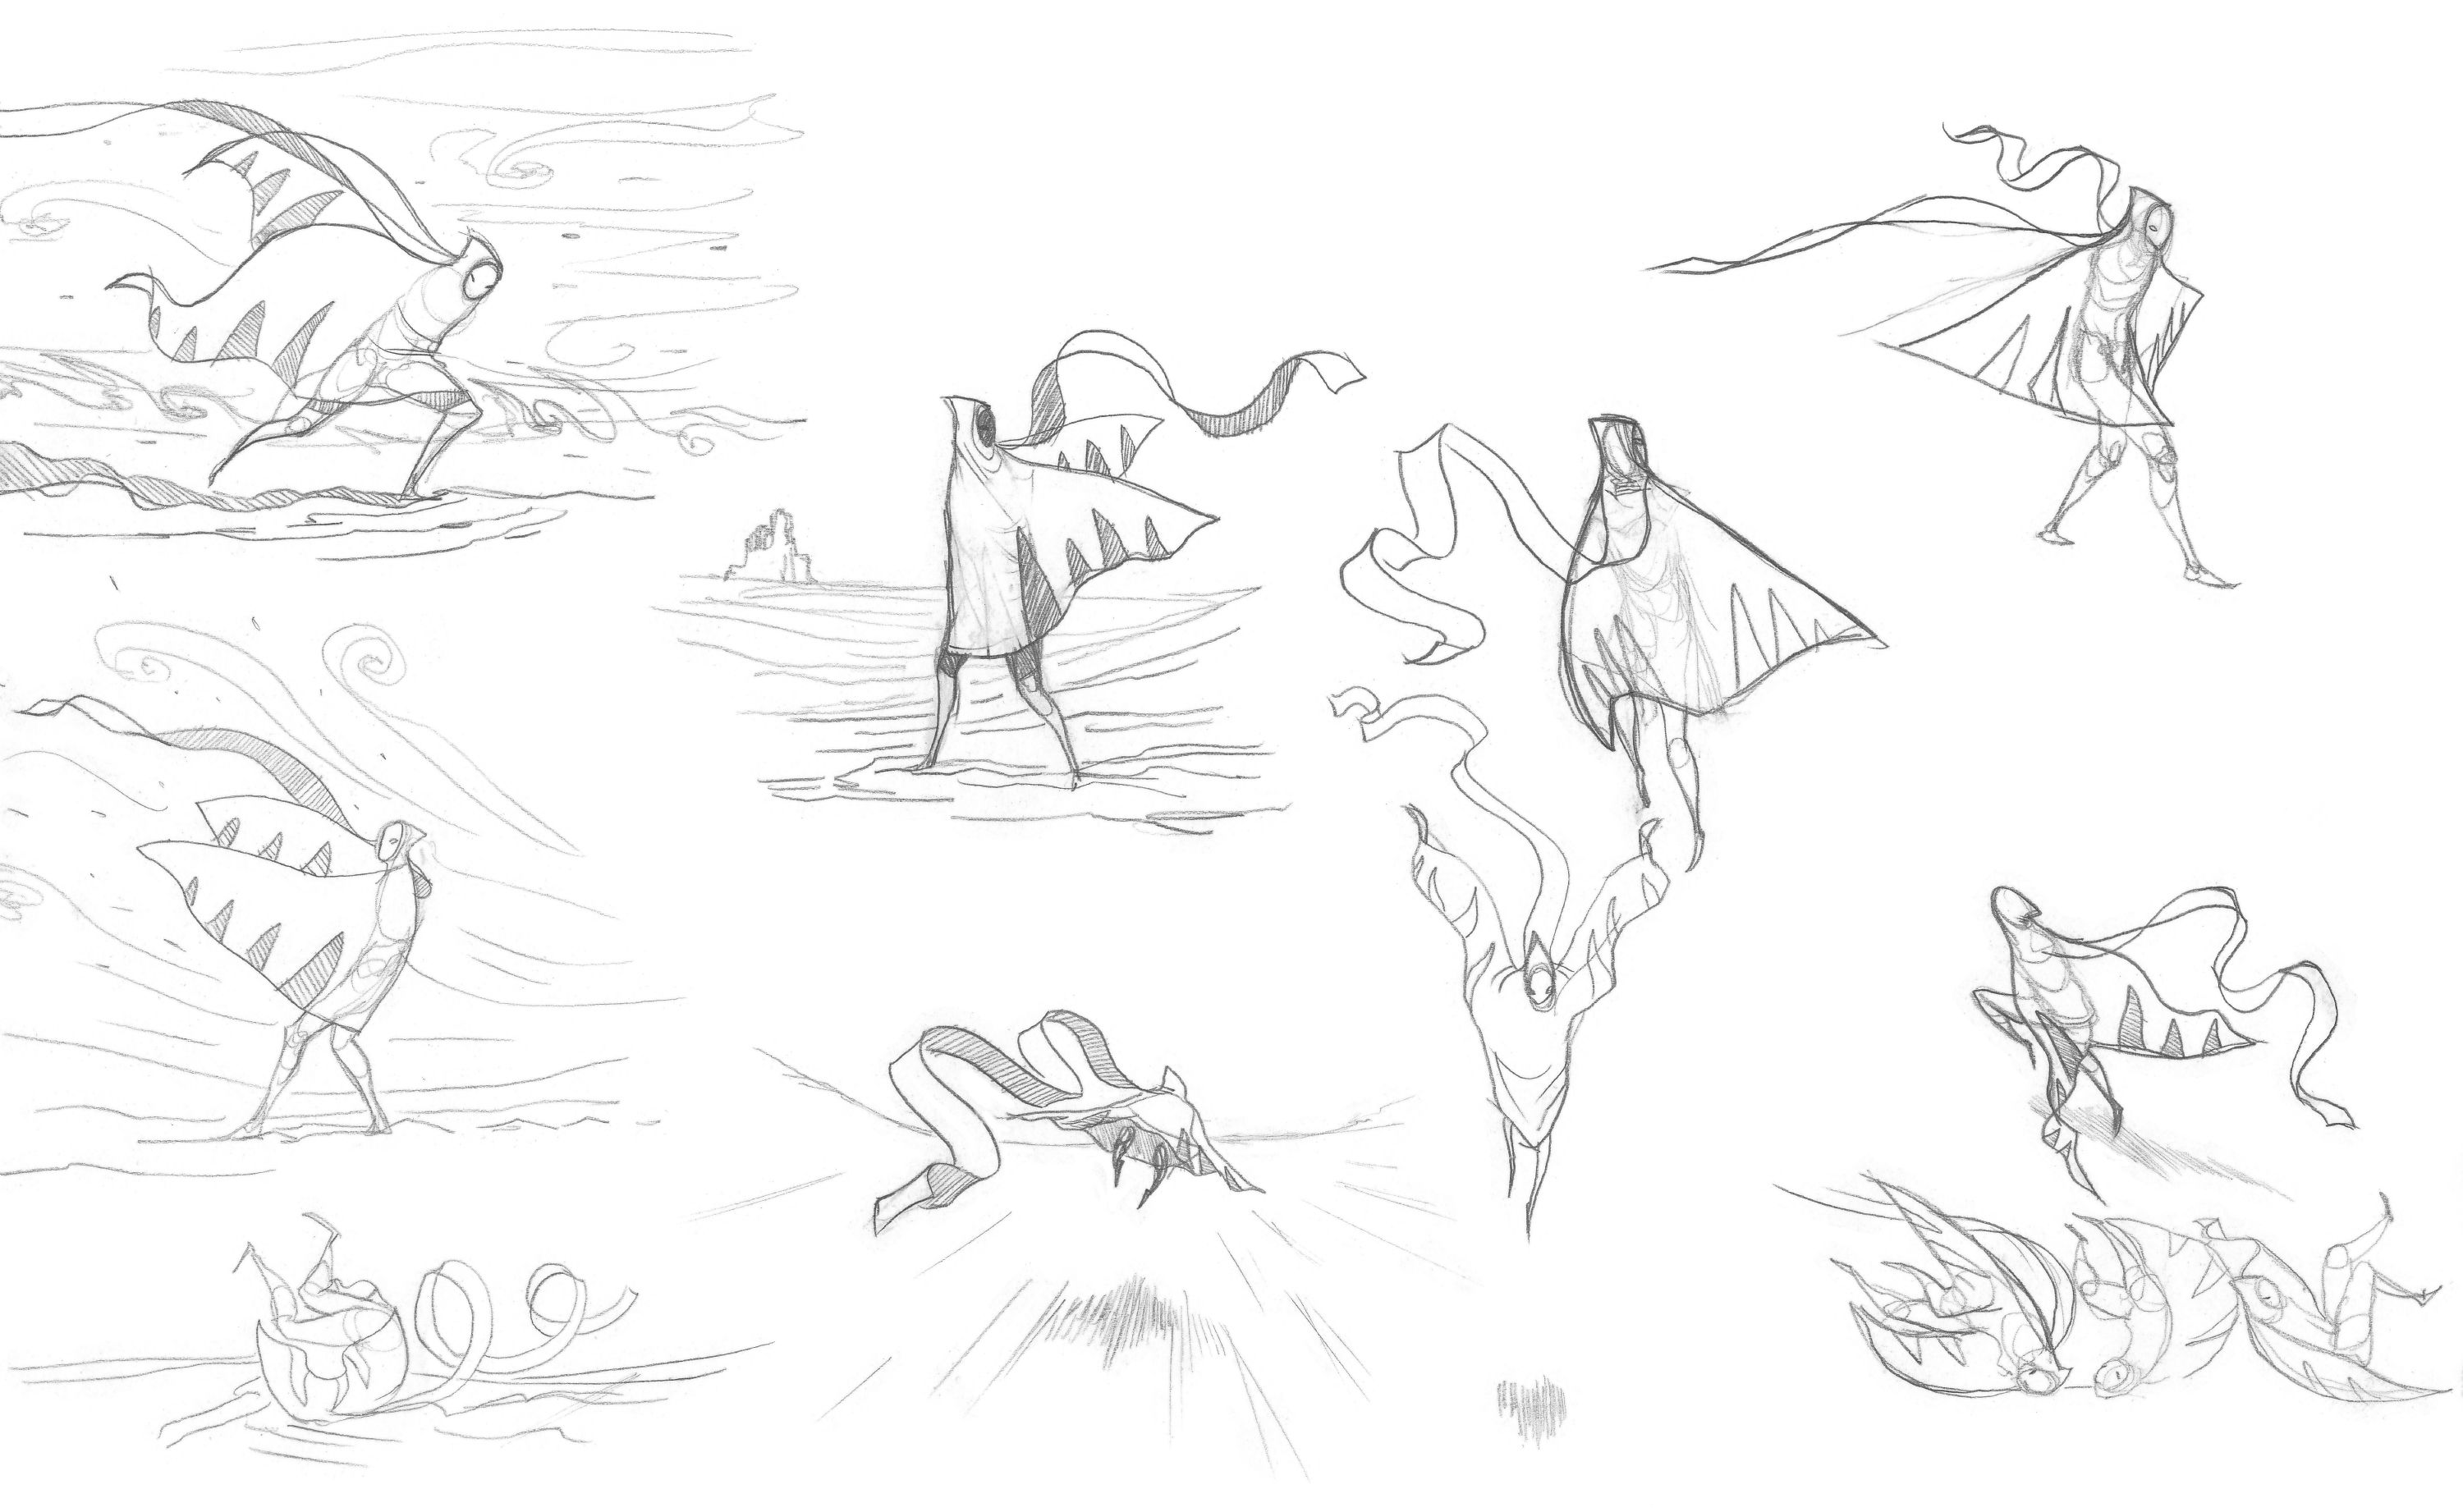 Character sketches, Journey™ ©2012, 2014 Sony Interactive Entertainment LLC. Journey is a trademark of Sony Interactive Entertainment LLC. Developed by Thatgamecompany.